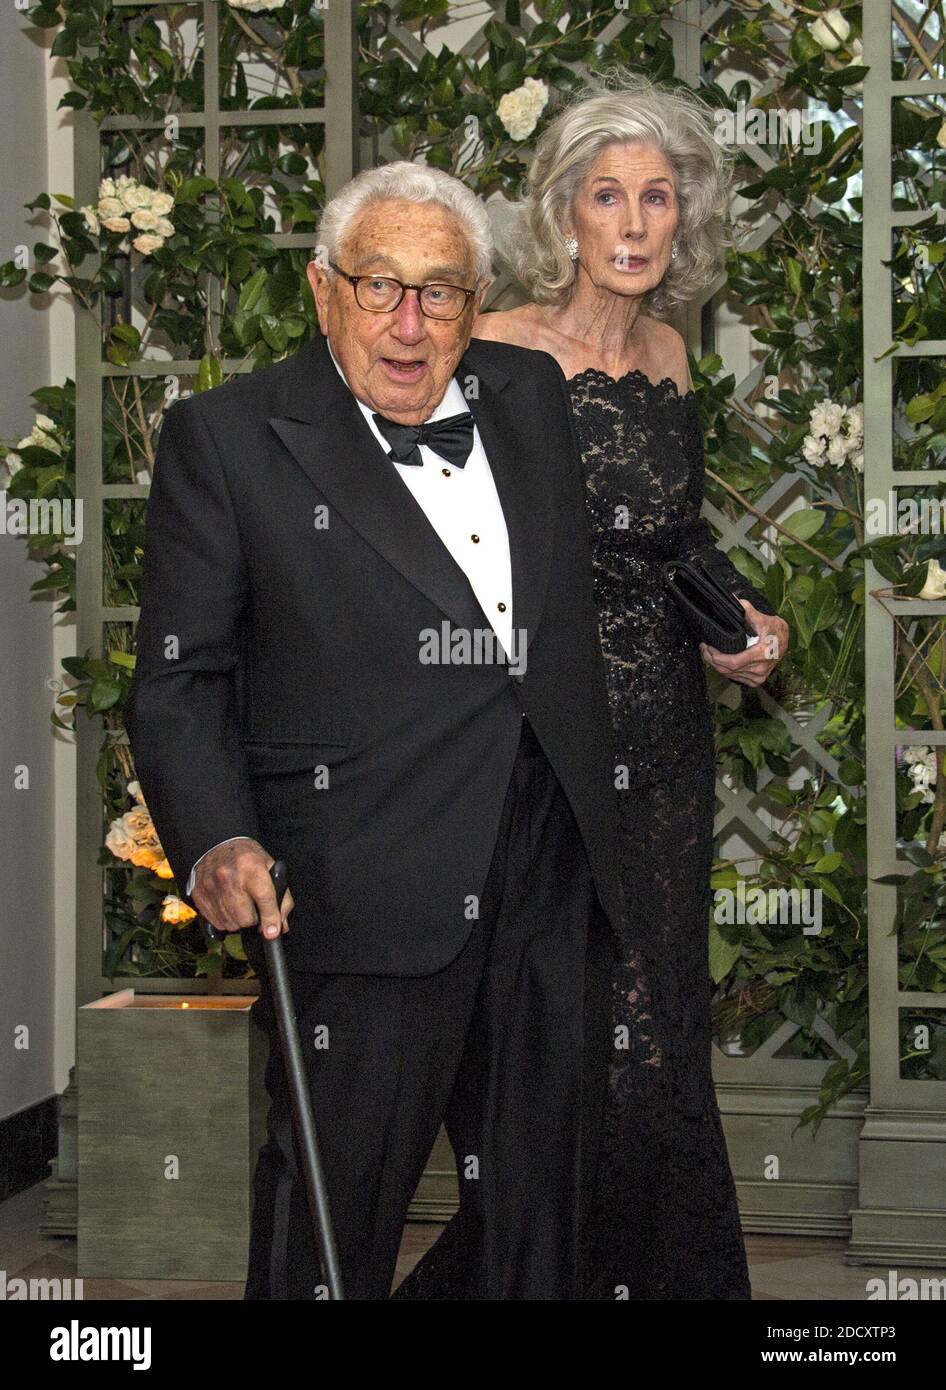 Former United States Secretary of State Henry A. Kissinger and Nancy Kissinger arrive for the State Dinner honoring Dinner honoring President Emmanuel Macron of the French Republic and Mrs. Brigitte Macron at the White House in Washington, DC, USA on Tuesday, April 24, 2018. Photo by Ron Sachs/CNP/ABACAPRESS.COM Stock Photo